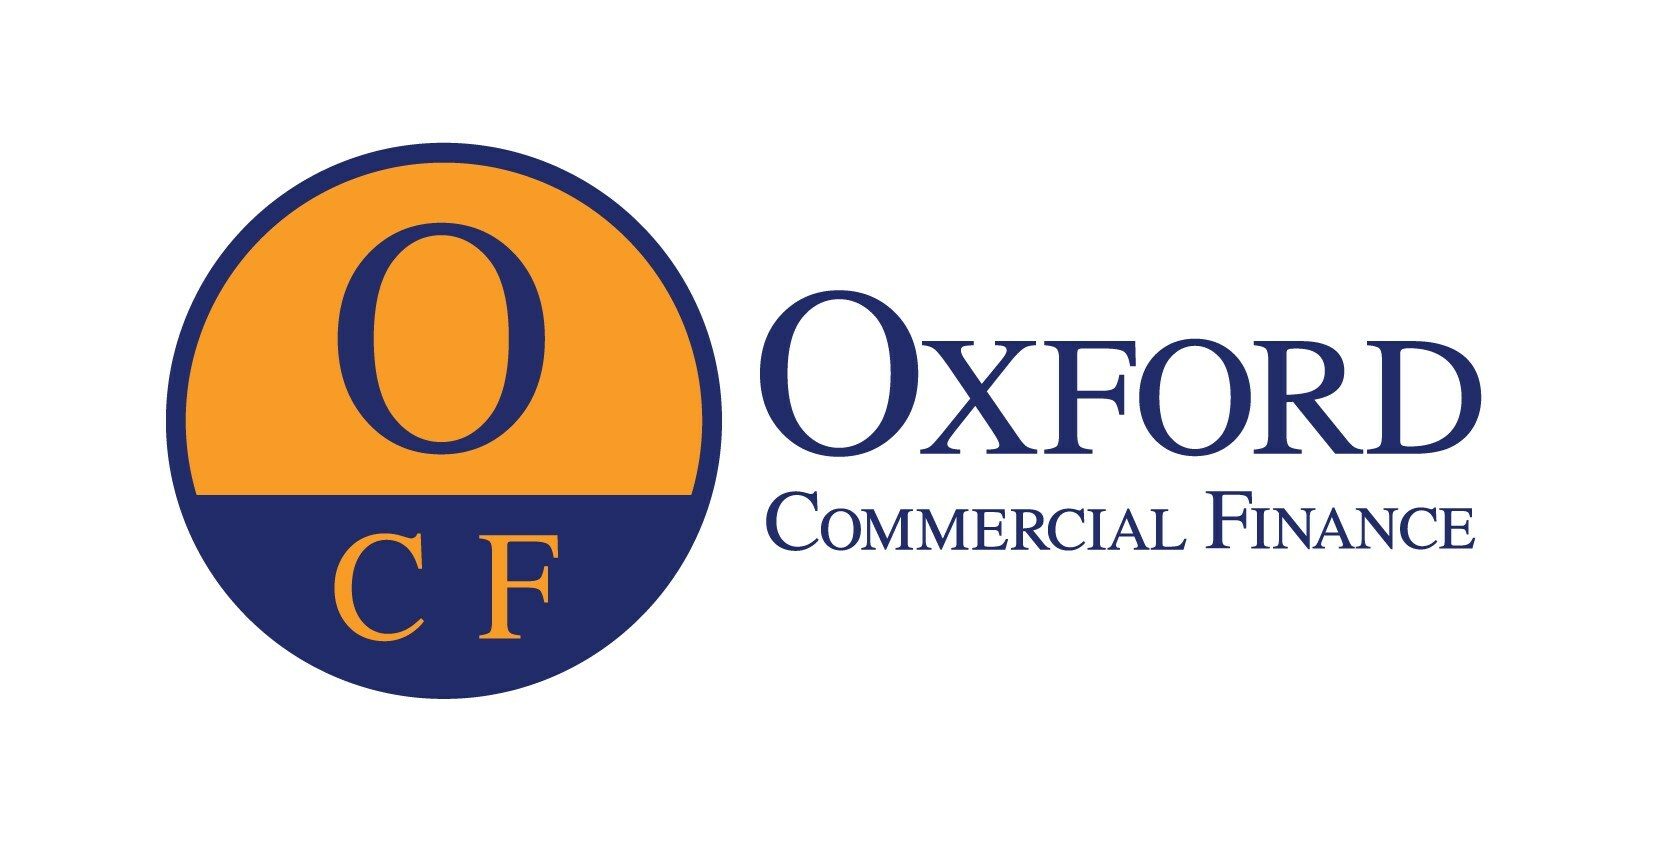 OXFORD COMMERCIAL FINANCE TRANSITIONS TOP LEADERSHIP TO SUPPORT CONTINUED BUSINESS GROWTH AND EXPANSION